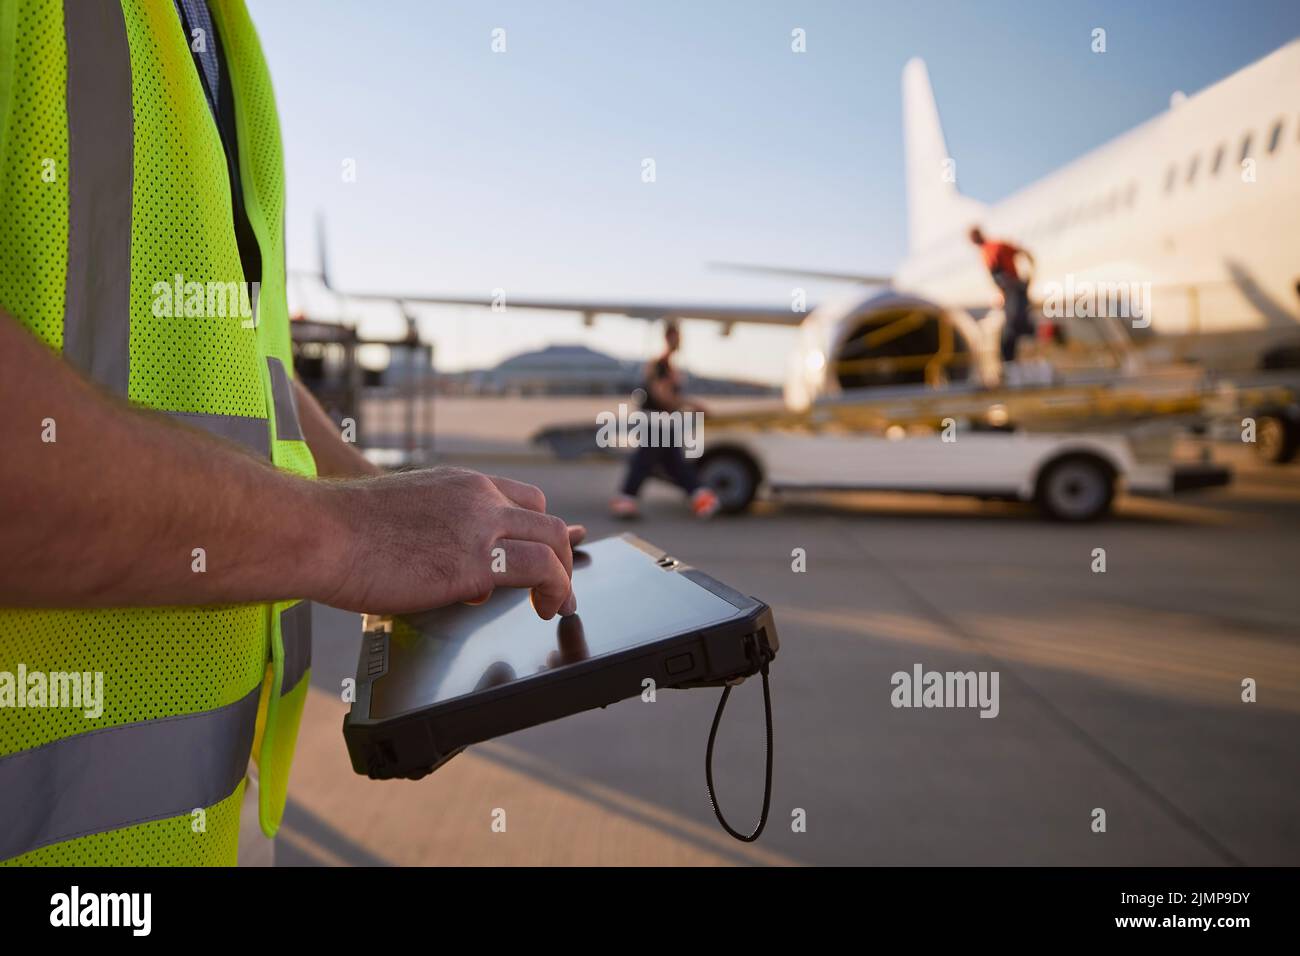 Member of ground crew preparing airplane before flight. Worker using tablet against plane at airport. Stock Photo